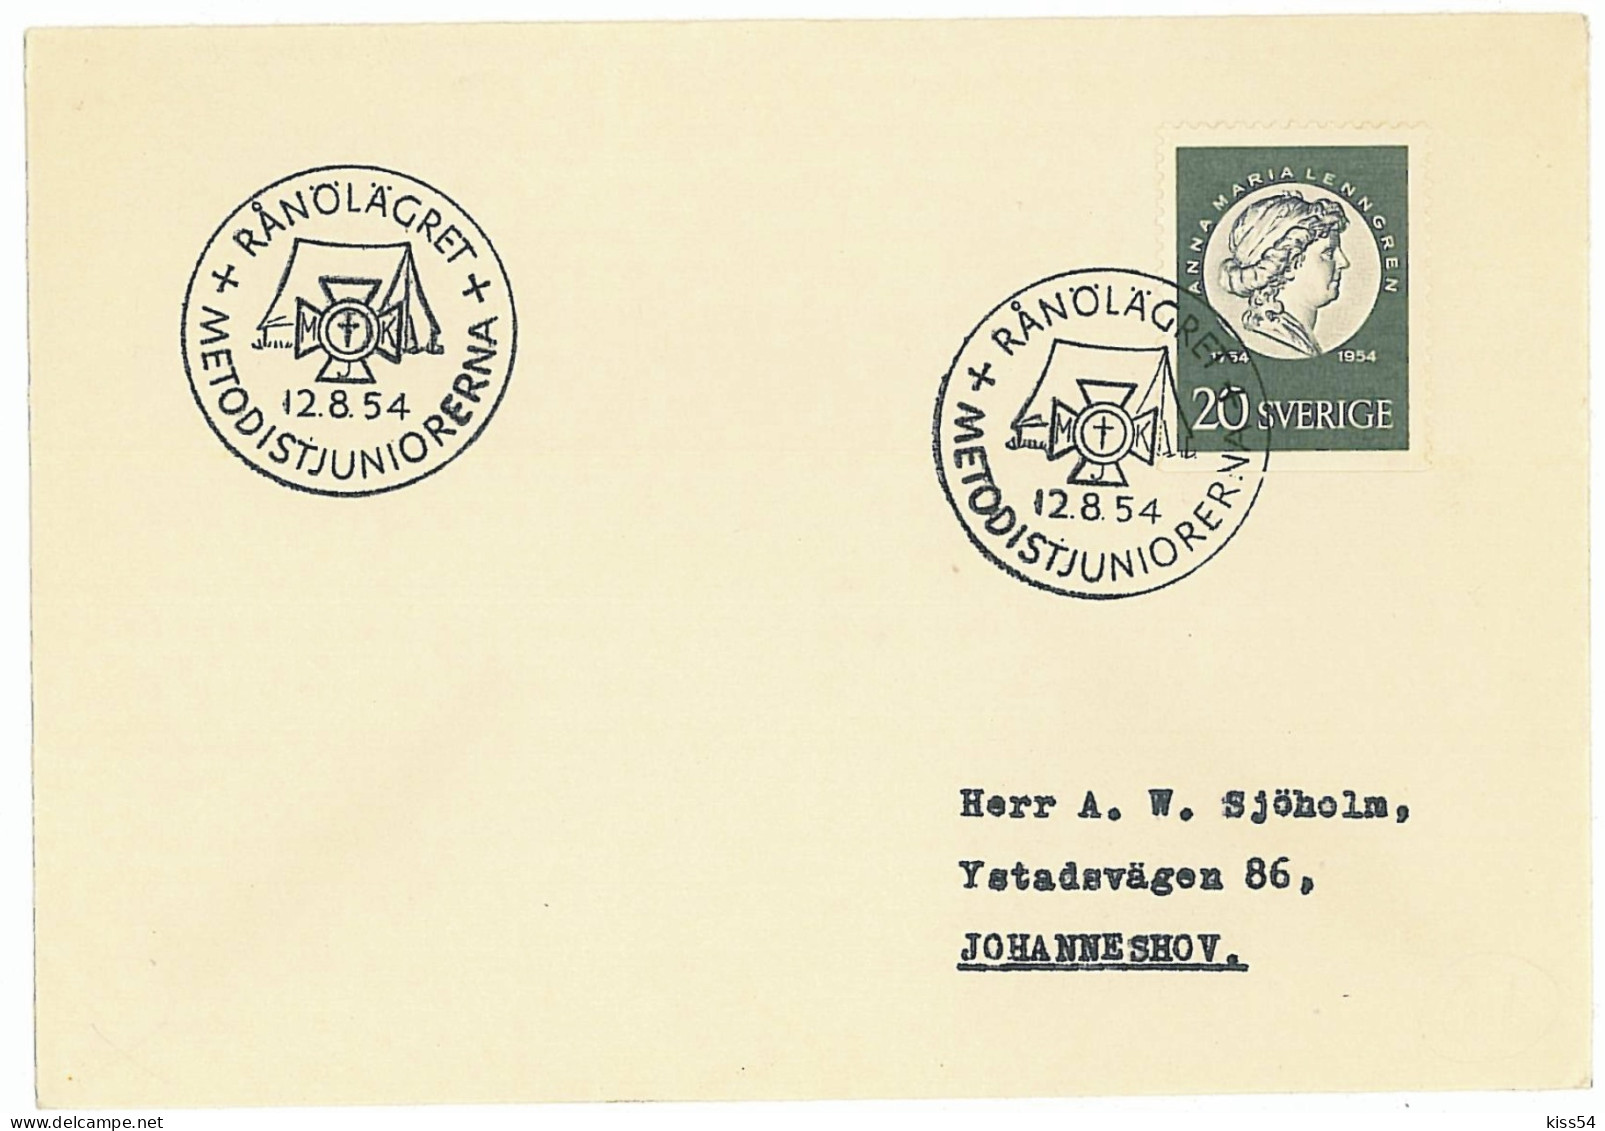 SC 30 - 61 SWEDEN, Scout - Cover - Used - 1954 - Covers & Documents